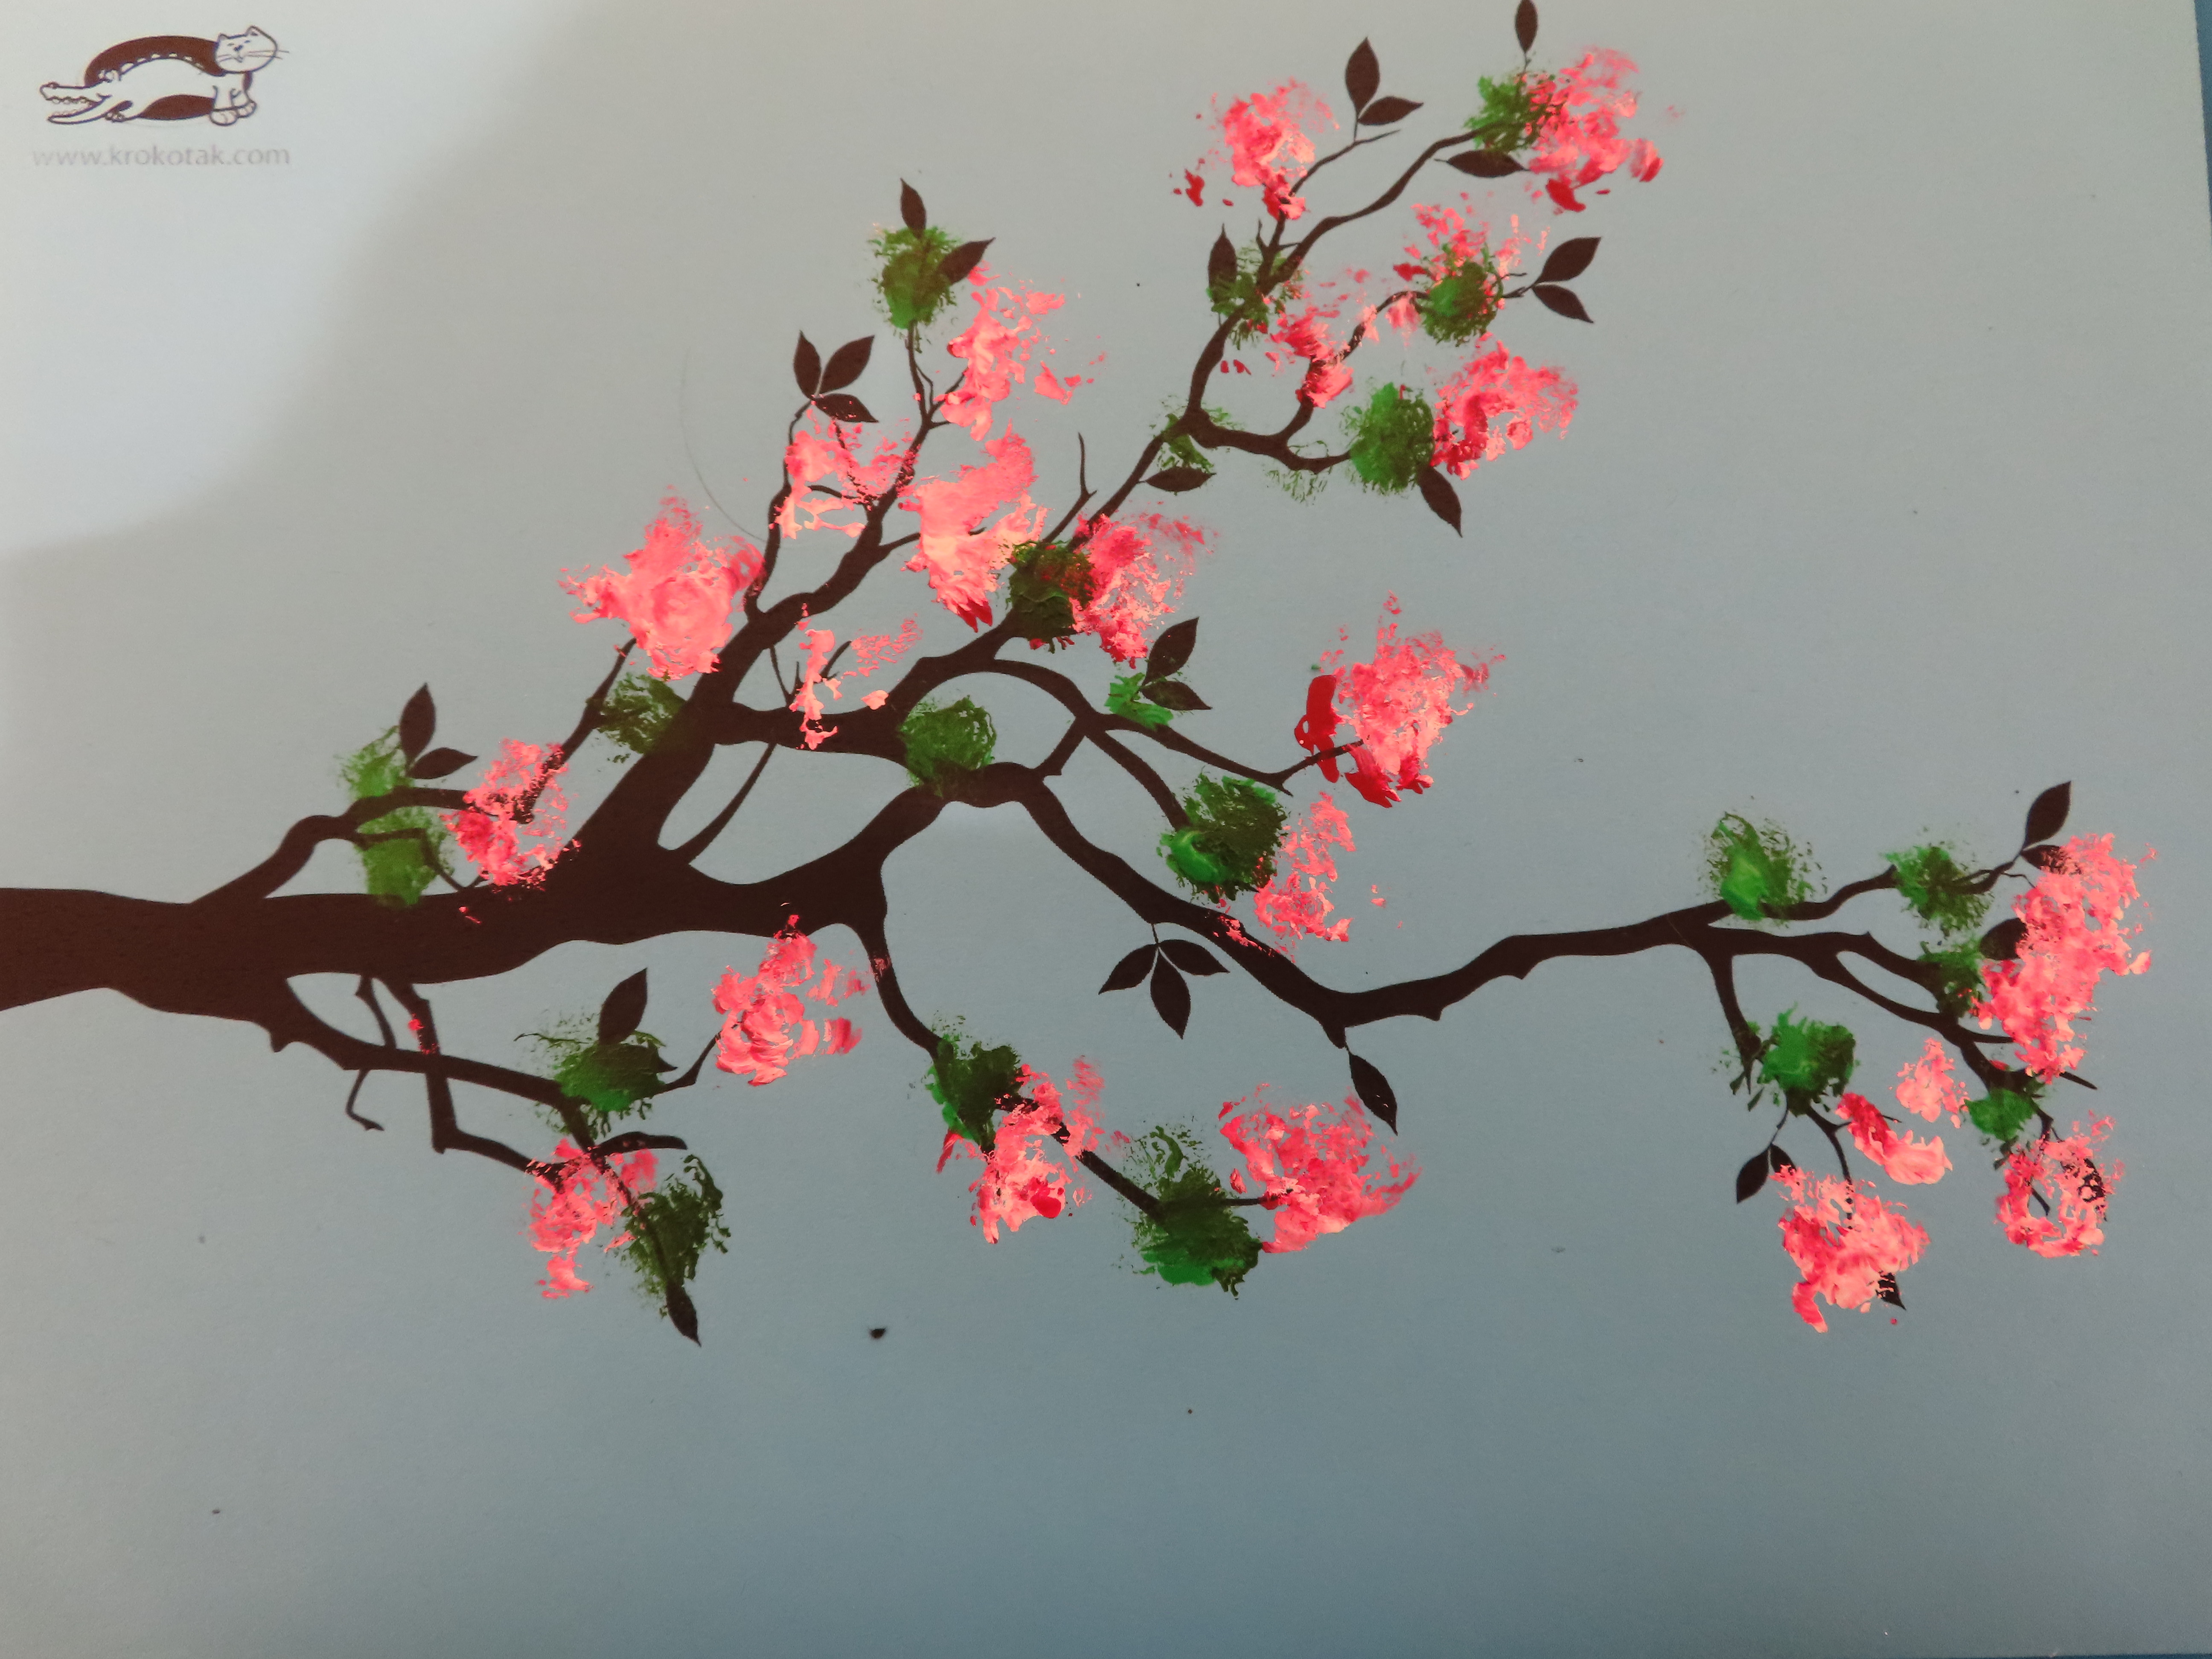 a black tree branch printout with pink and white blossoms and green leaves painted on it